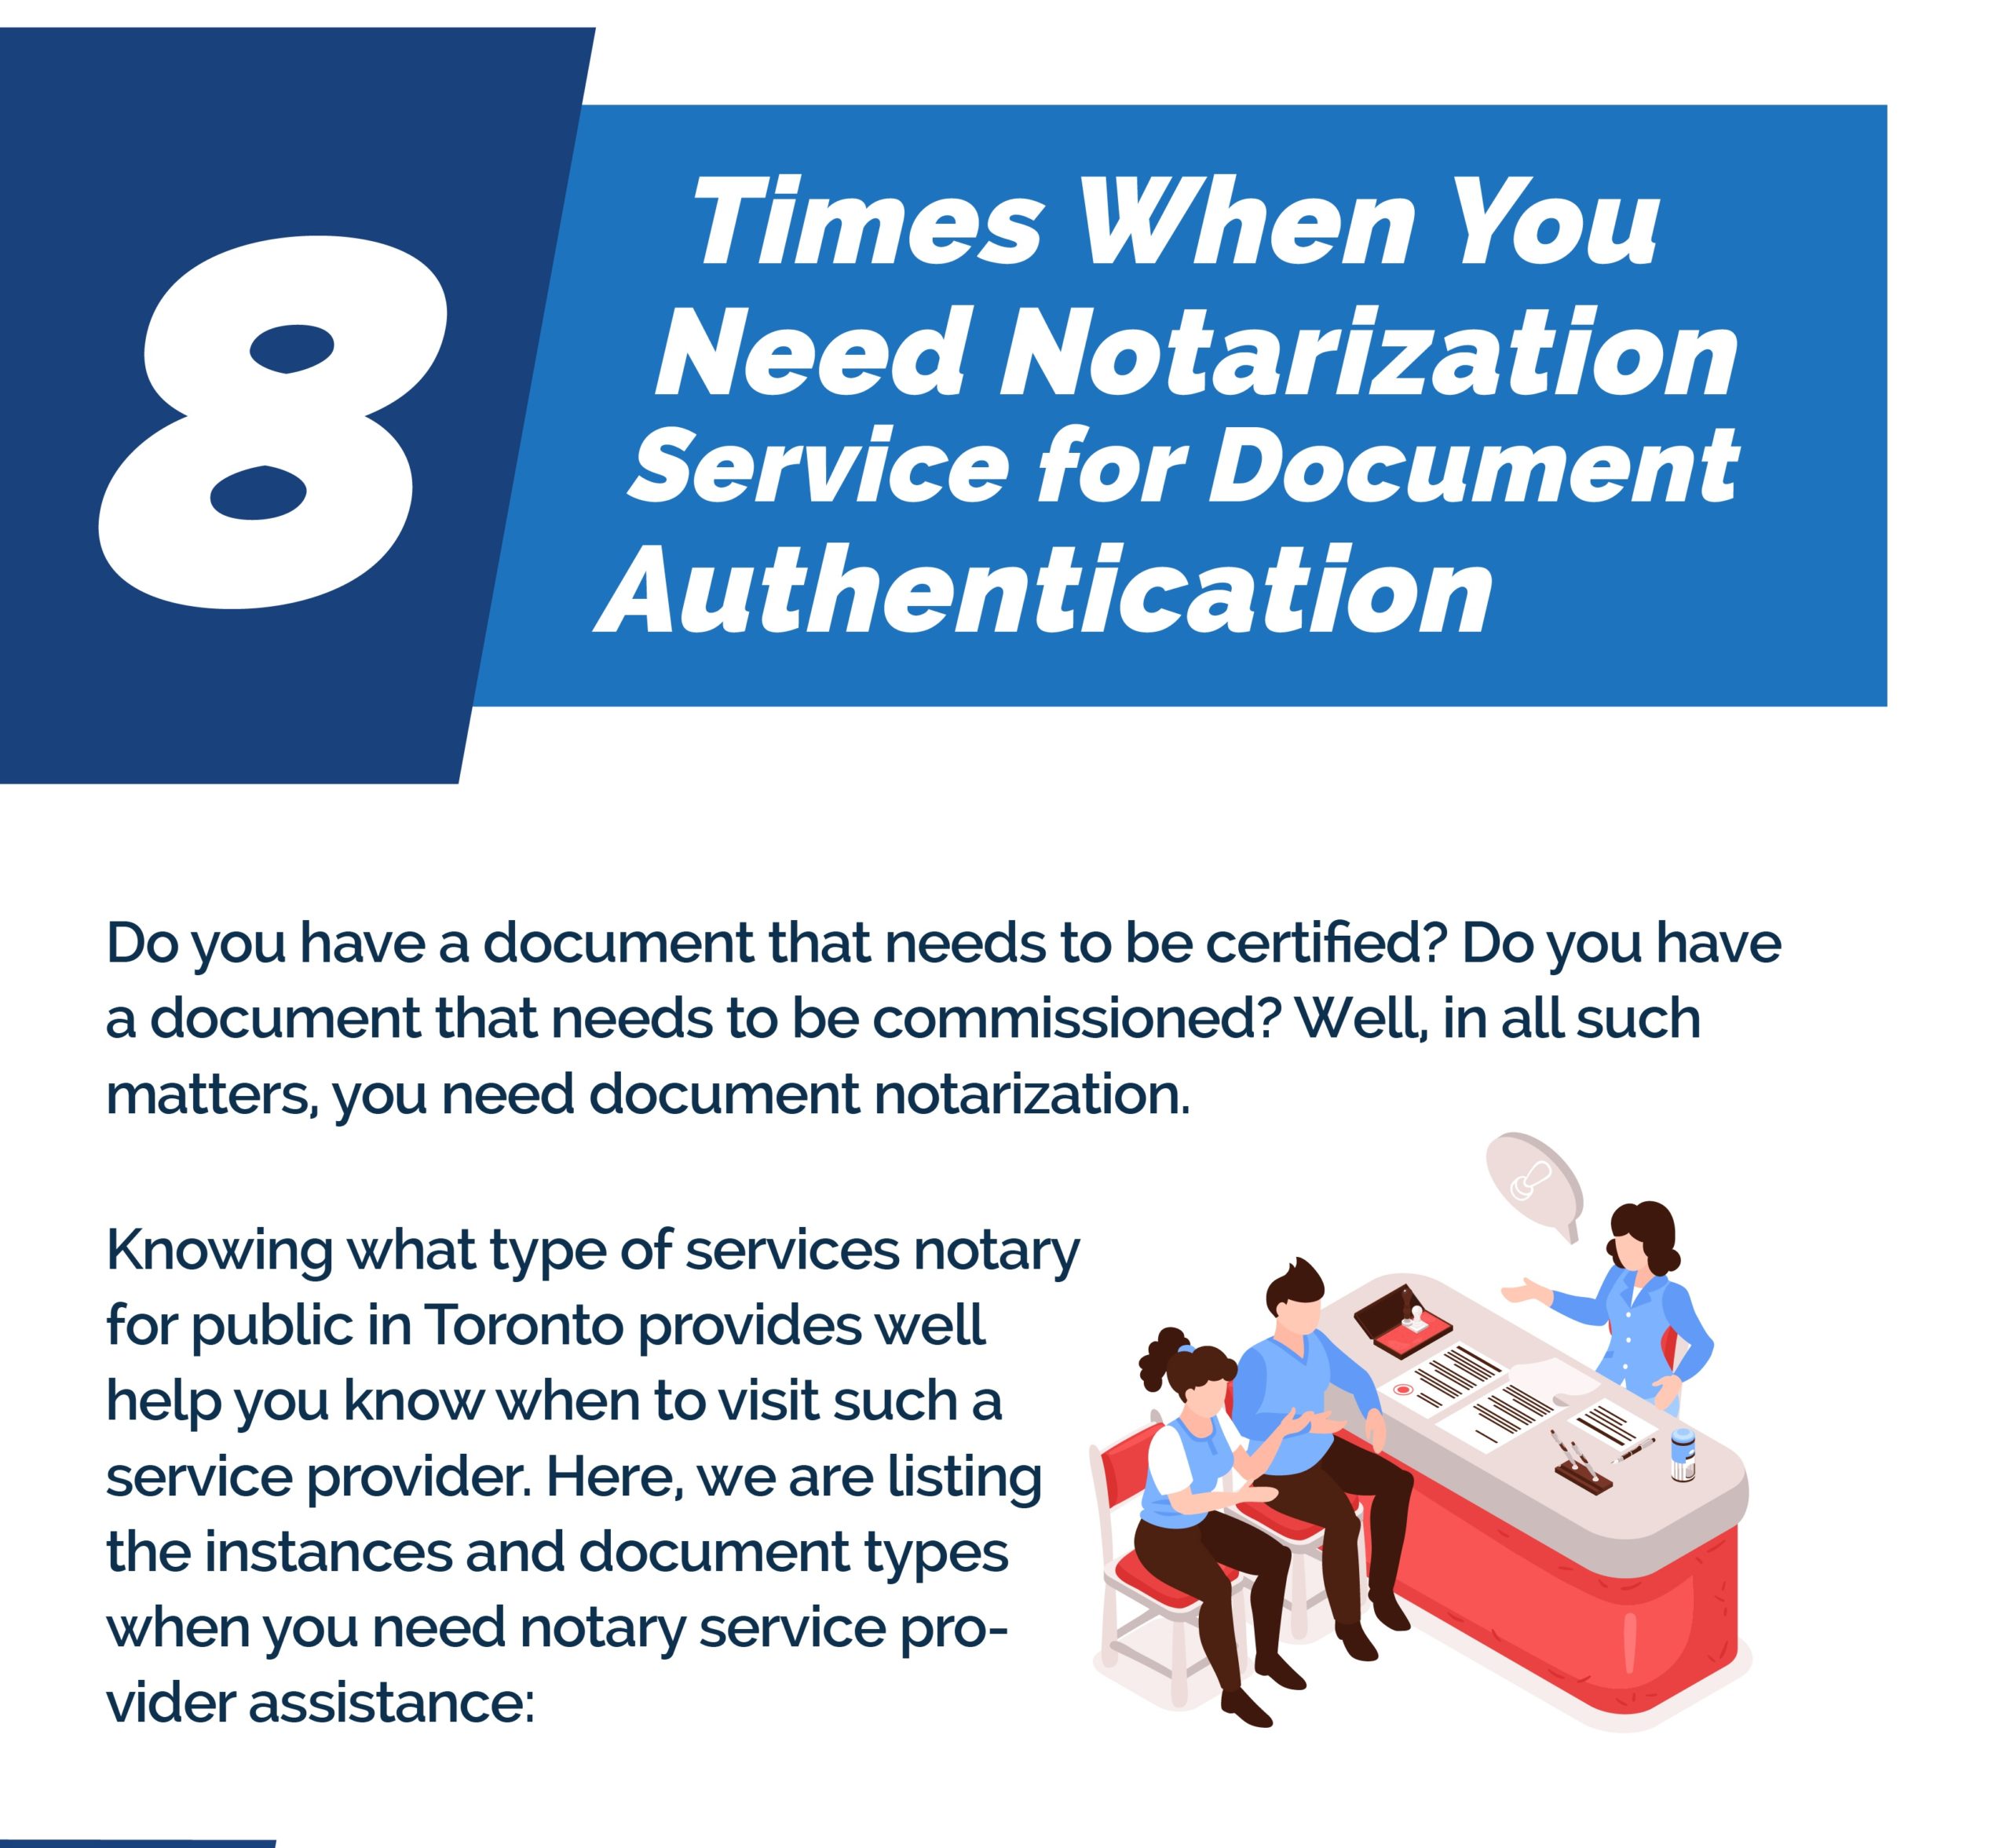 Notarization Service For Document Authentication